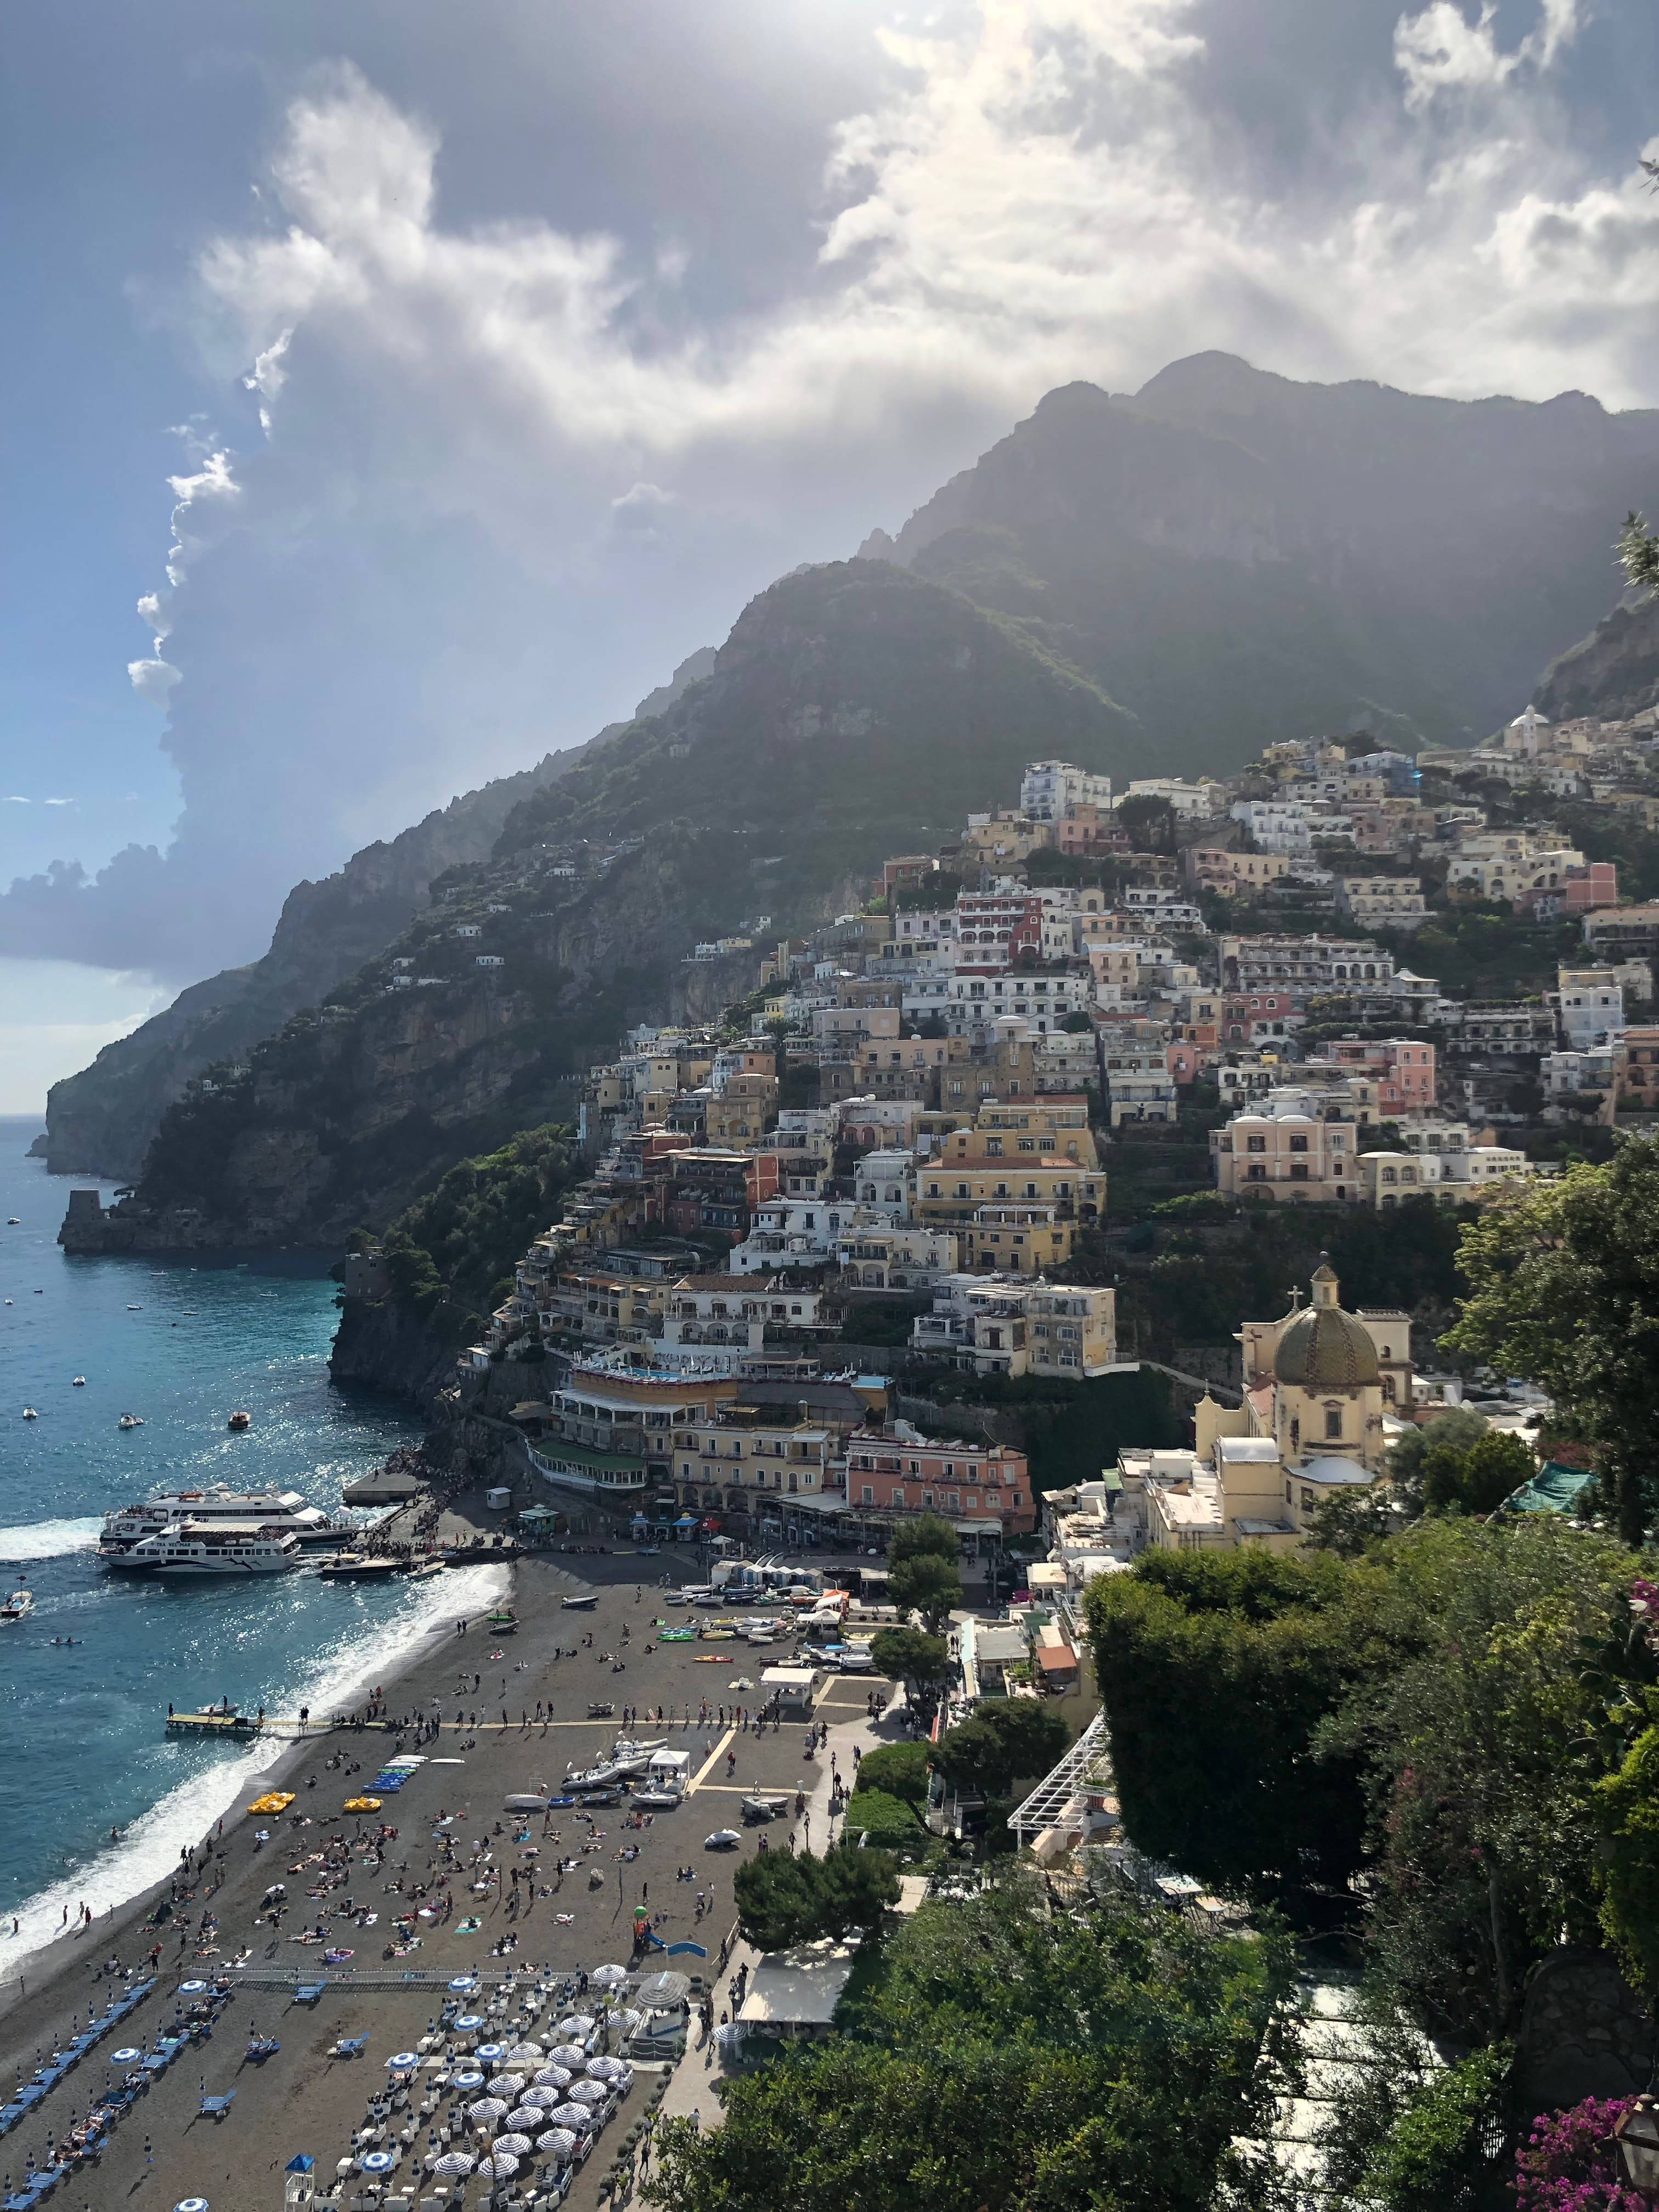 Picture in Positano, Italy